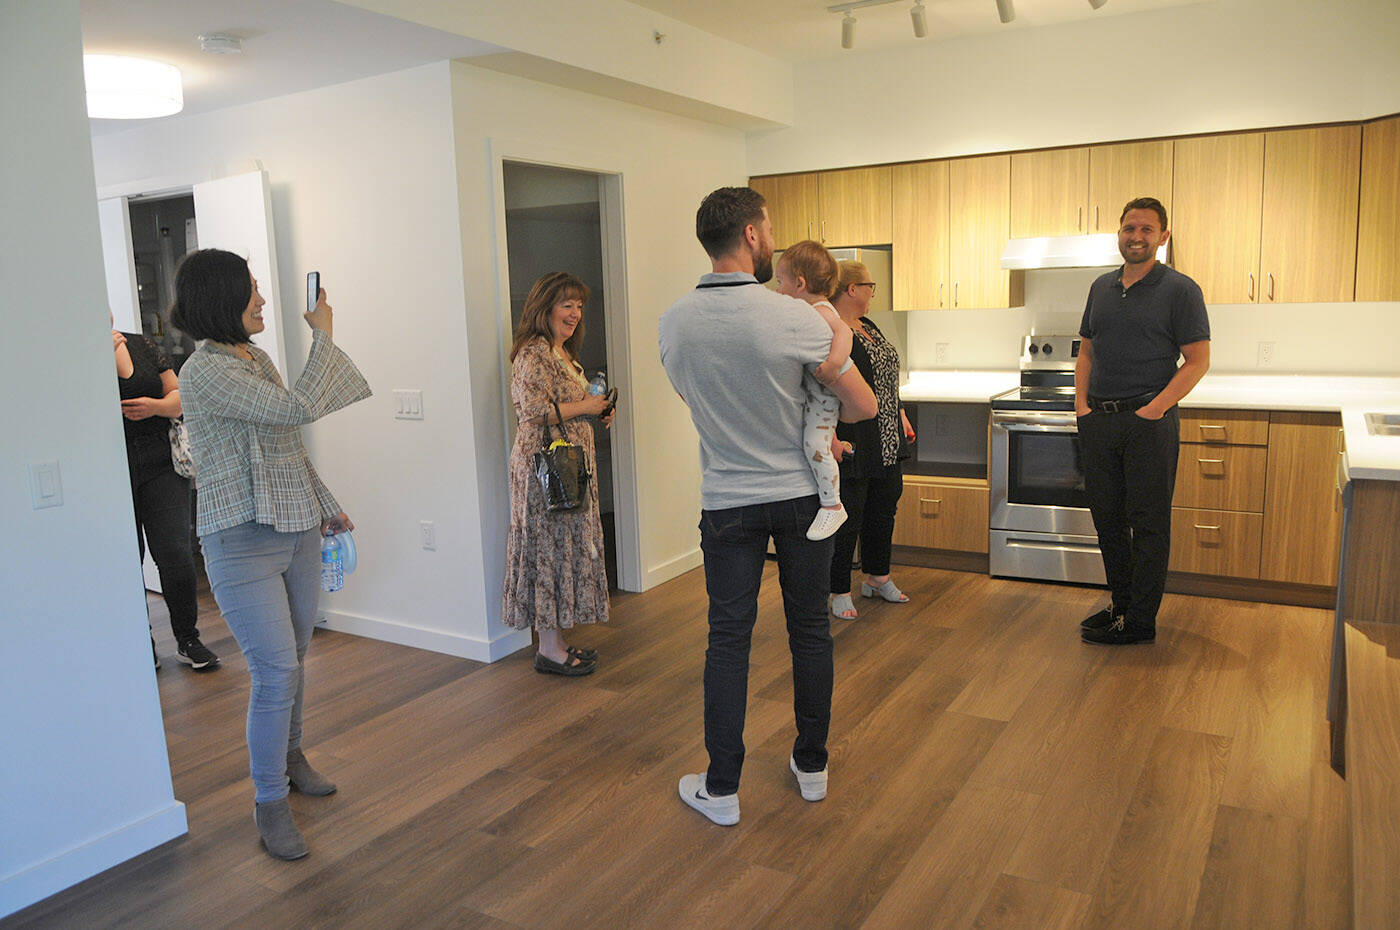 People tour the inside of one of the units at the Tzeachten affordable housing project on Thursday, June 23, 2022. (Jenna Hauck/ Chilliwack Progress)